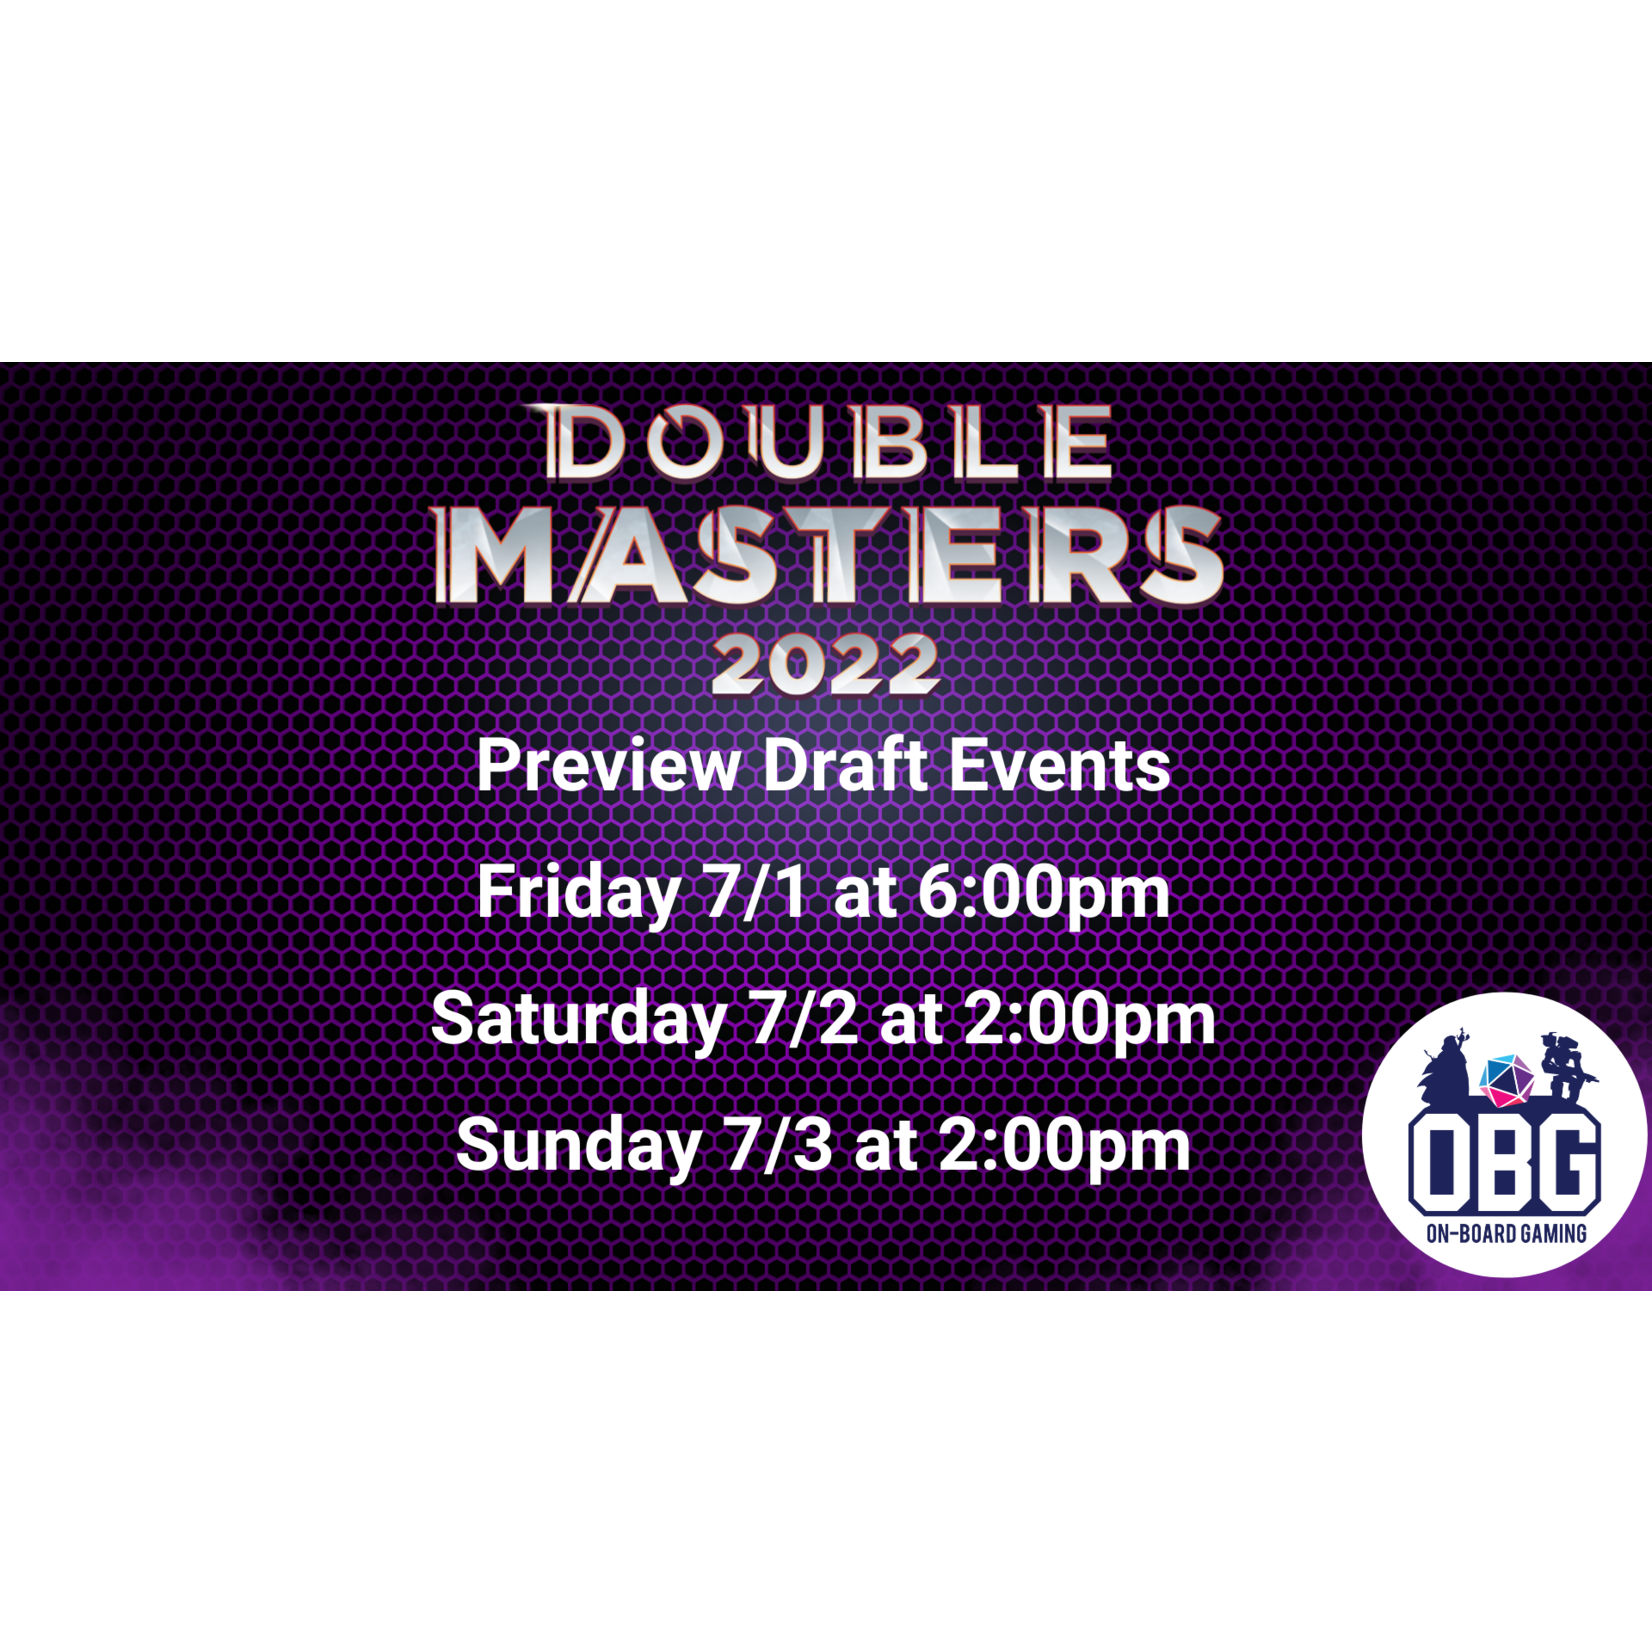 Double Masters Preview Weekend Draft Event Saturday 2:00pm